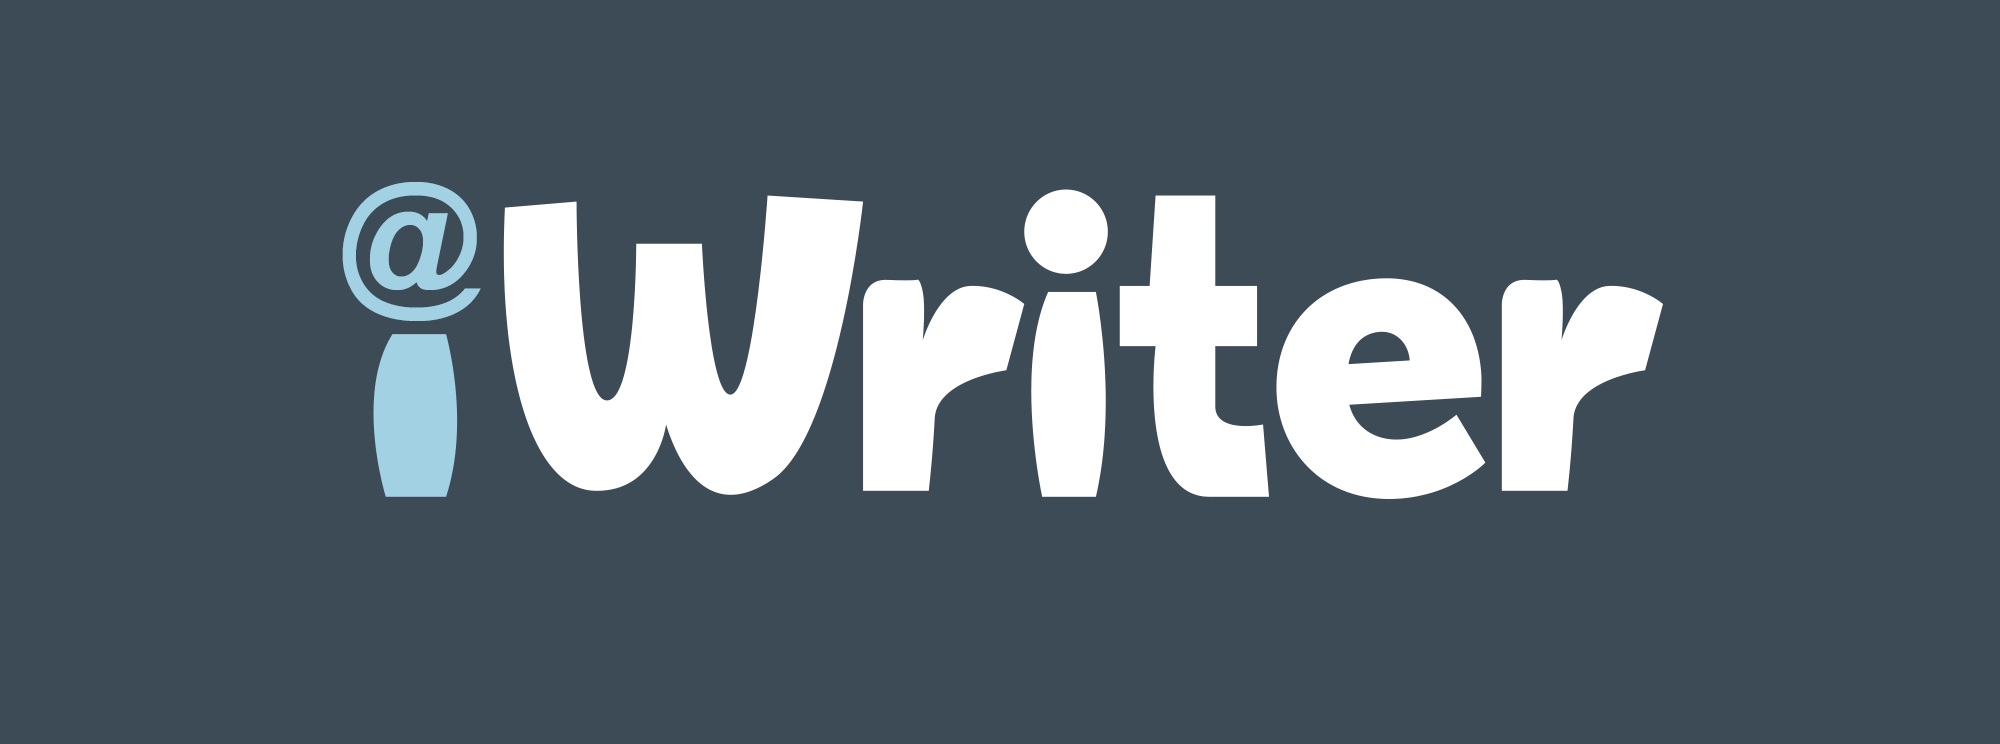 How to Make Money Writing Online With iWriter.com - iWriter Blog